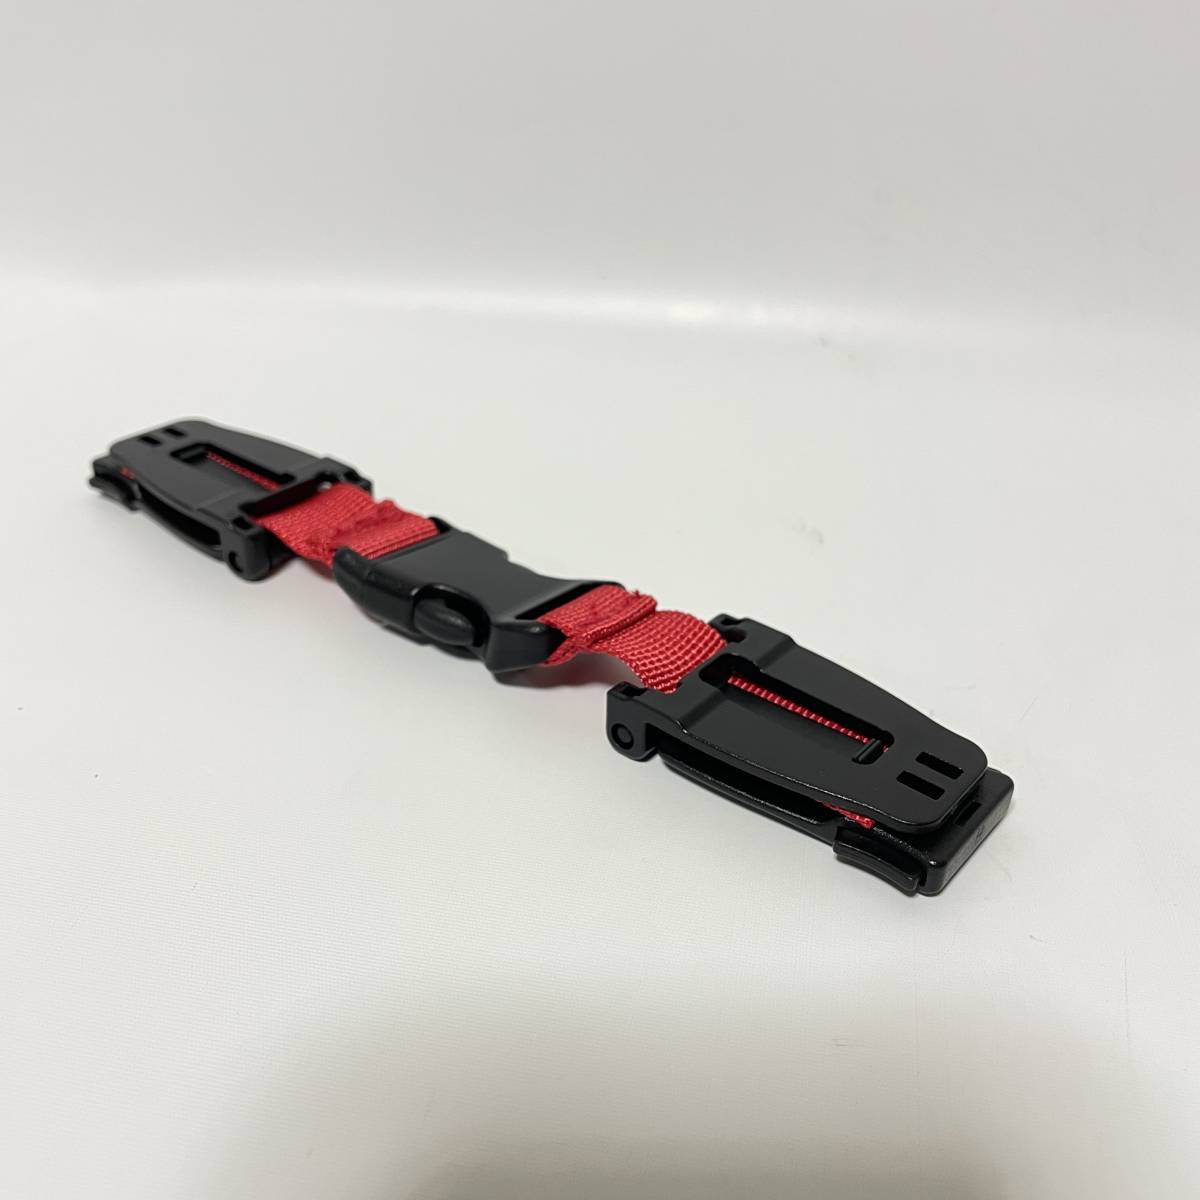  child seat clip Harness safety seat auxiliary belt assistance buckle stroller baby seat coming out .. prevention red MA0344RD